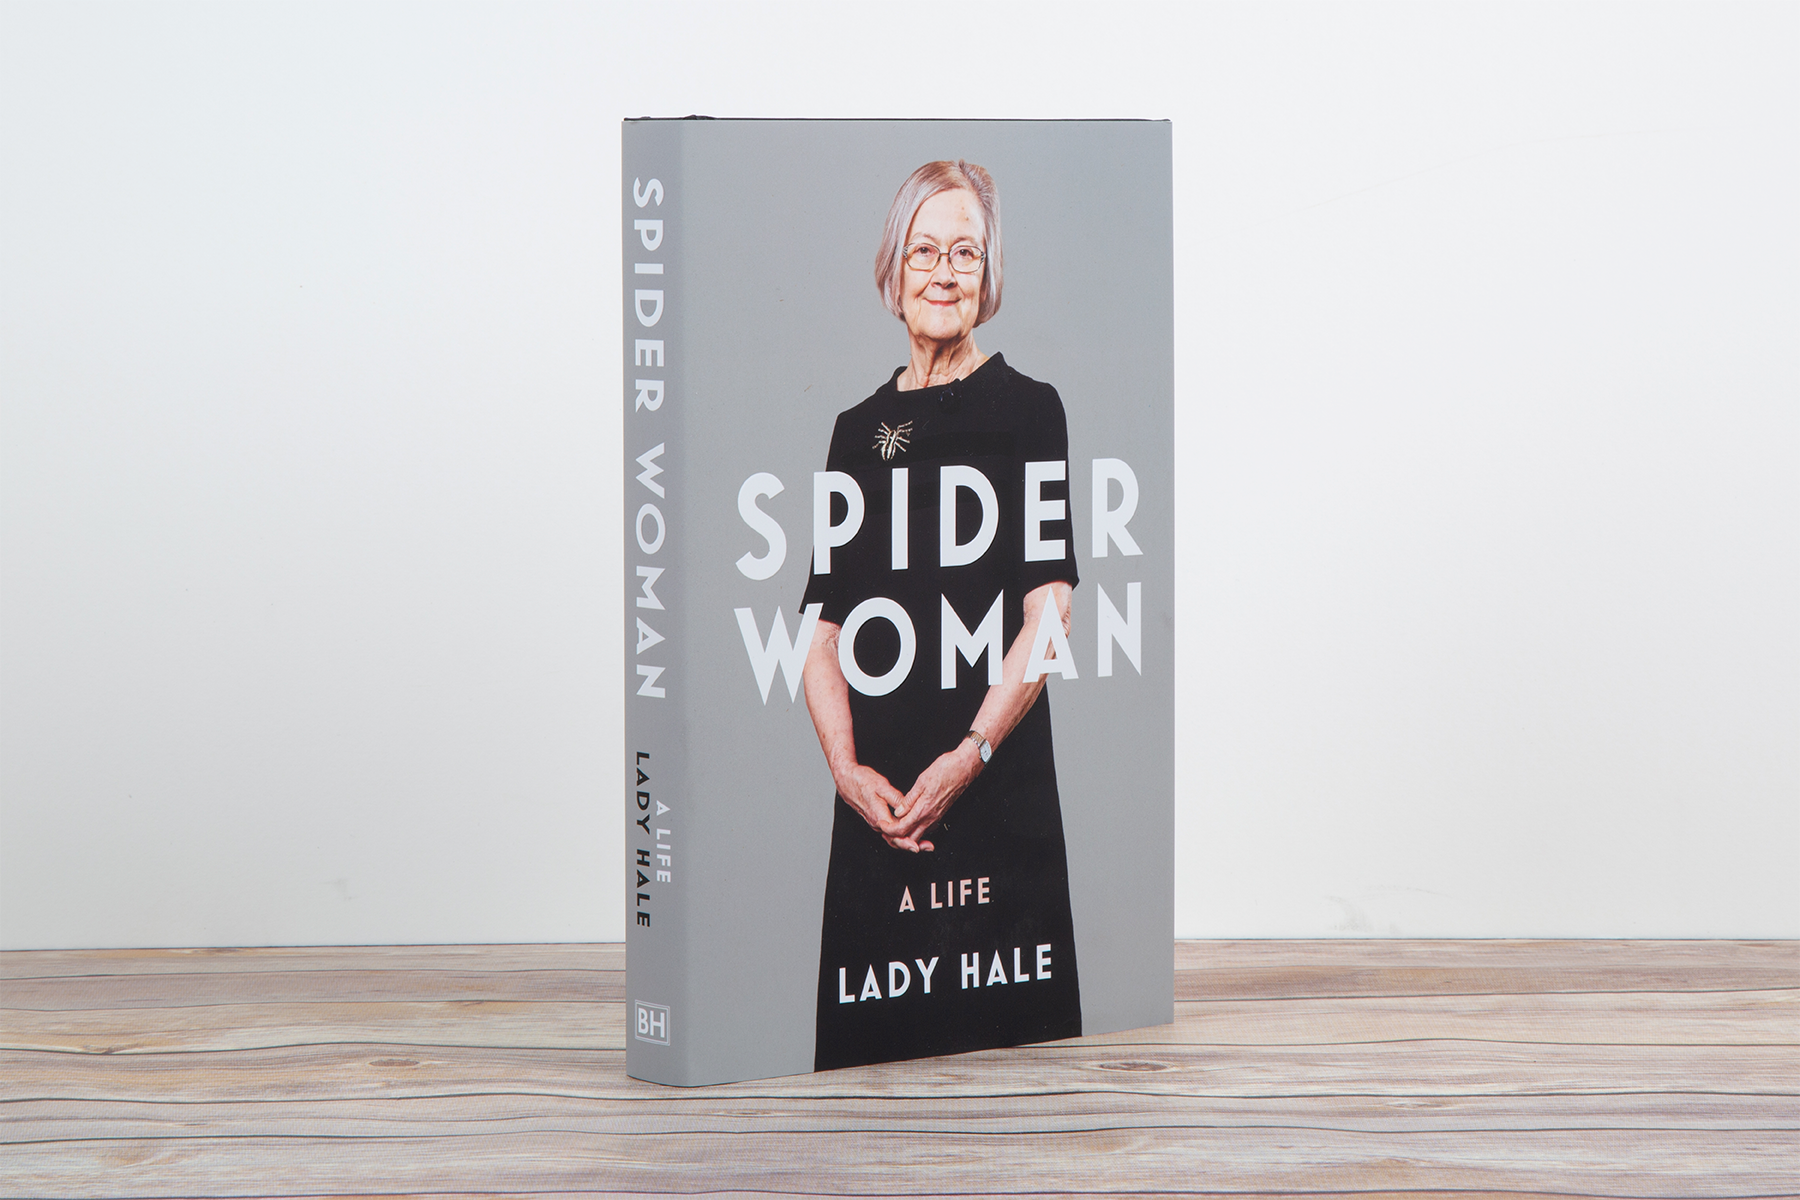 Book, Spider Woman, standing upright on a wooden shelf